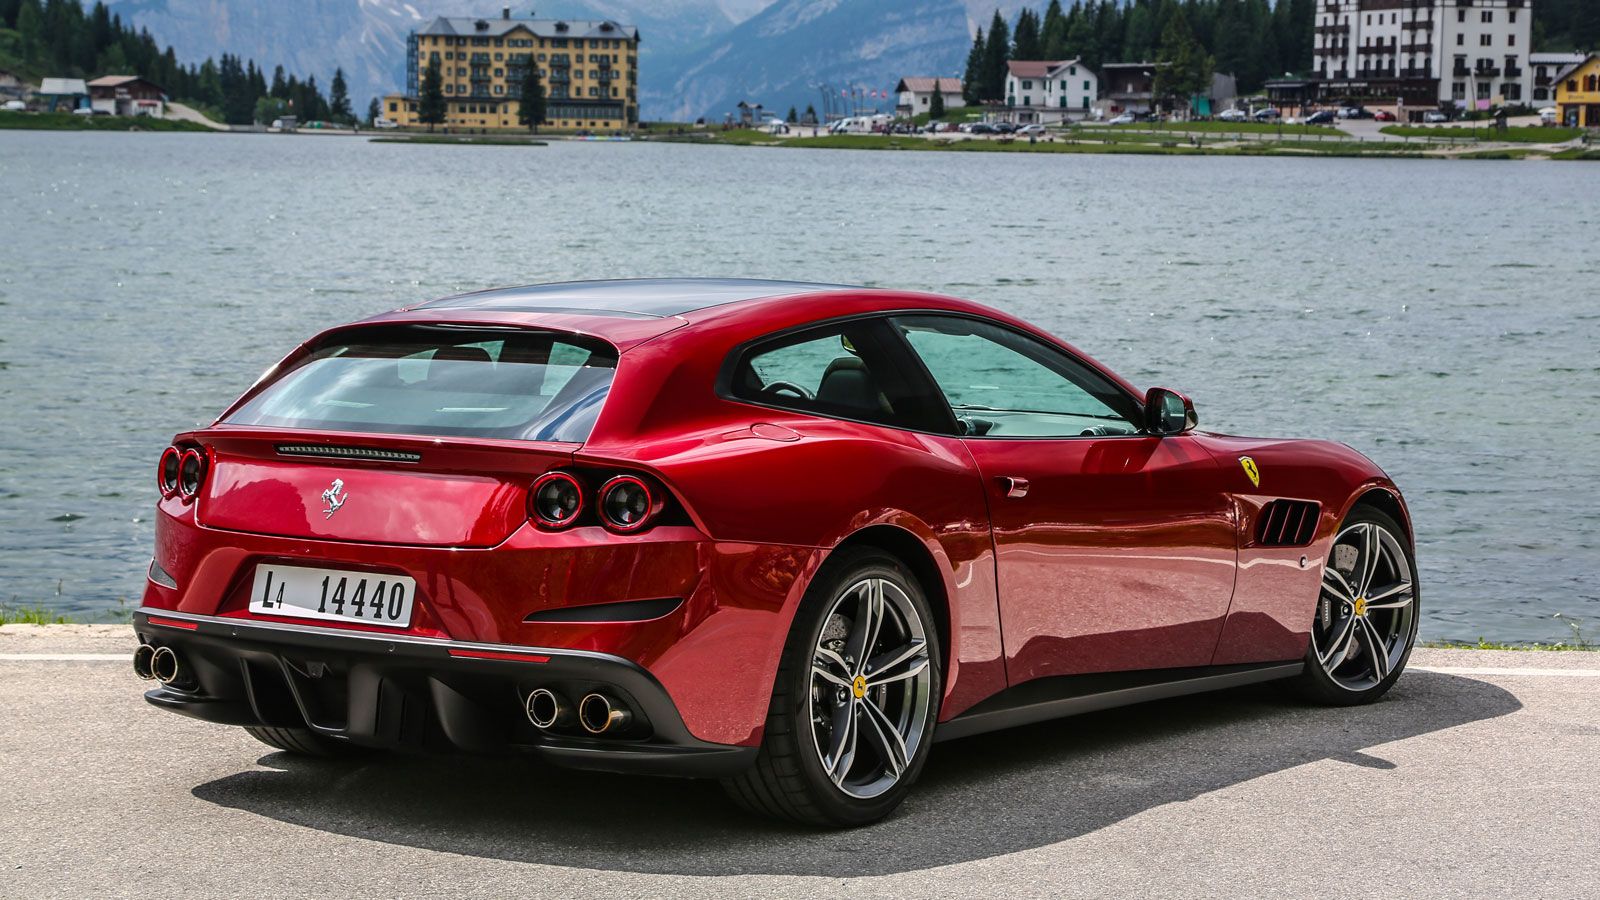 2019 Ferrari GTC4Lusso review: Cold-weather testing